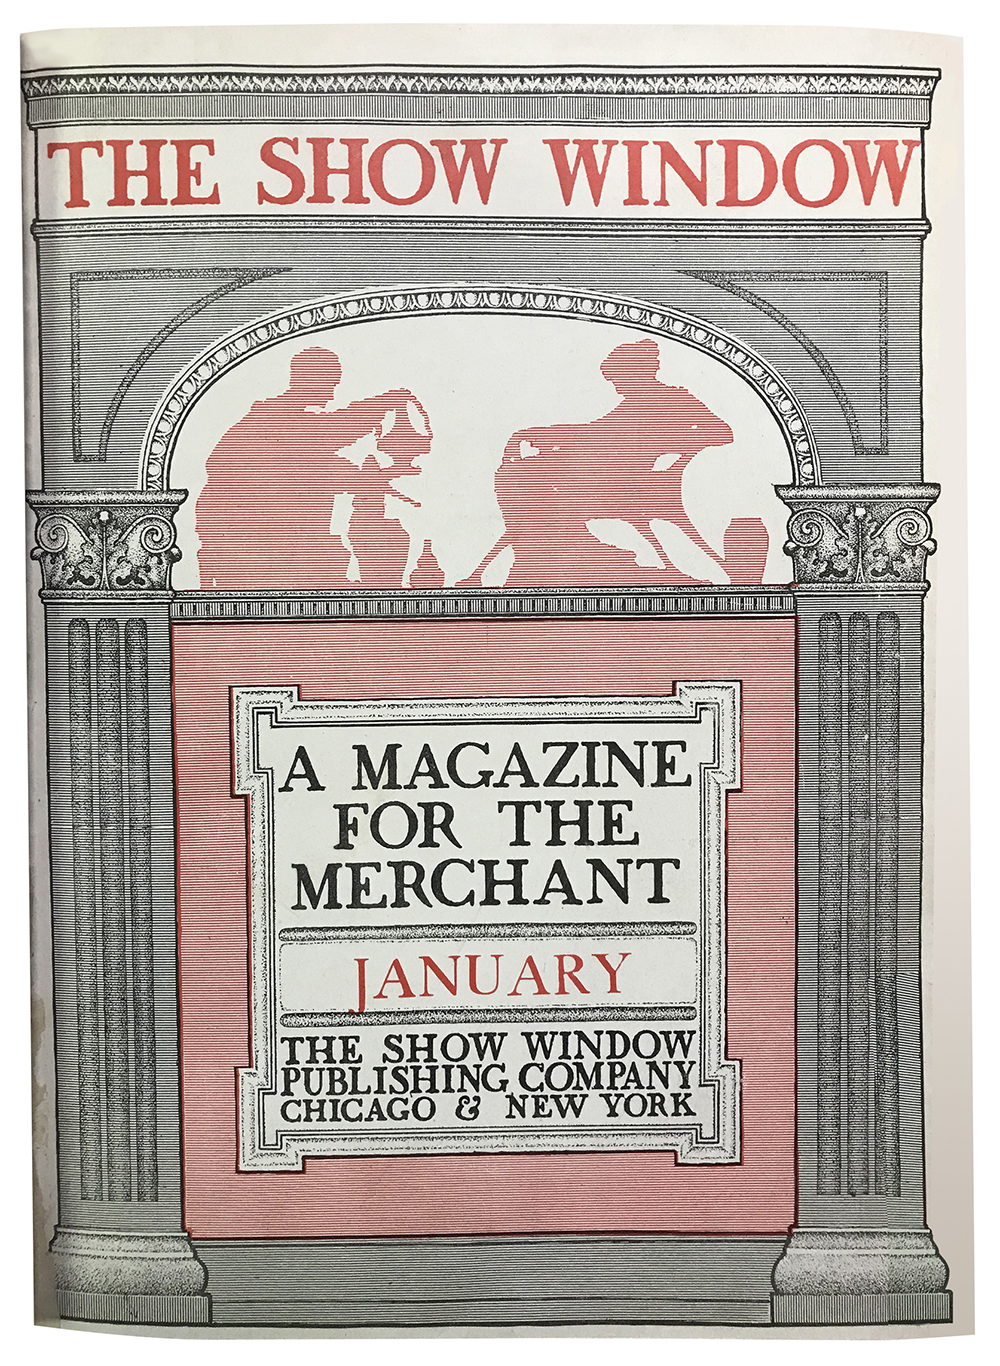 31 Vintage Magazine Covers from VMSD’s 125-Year History